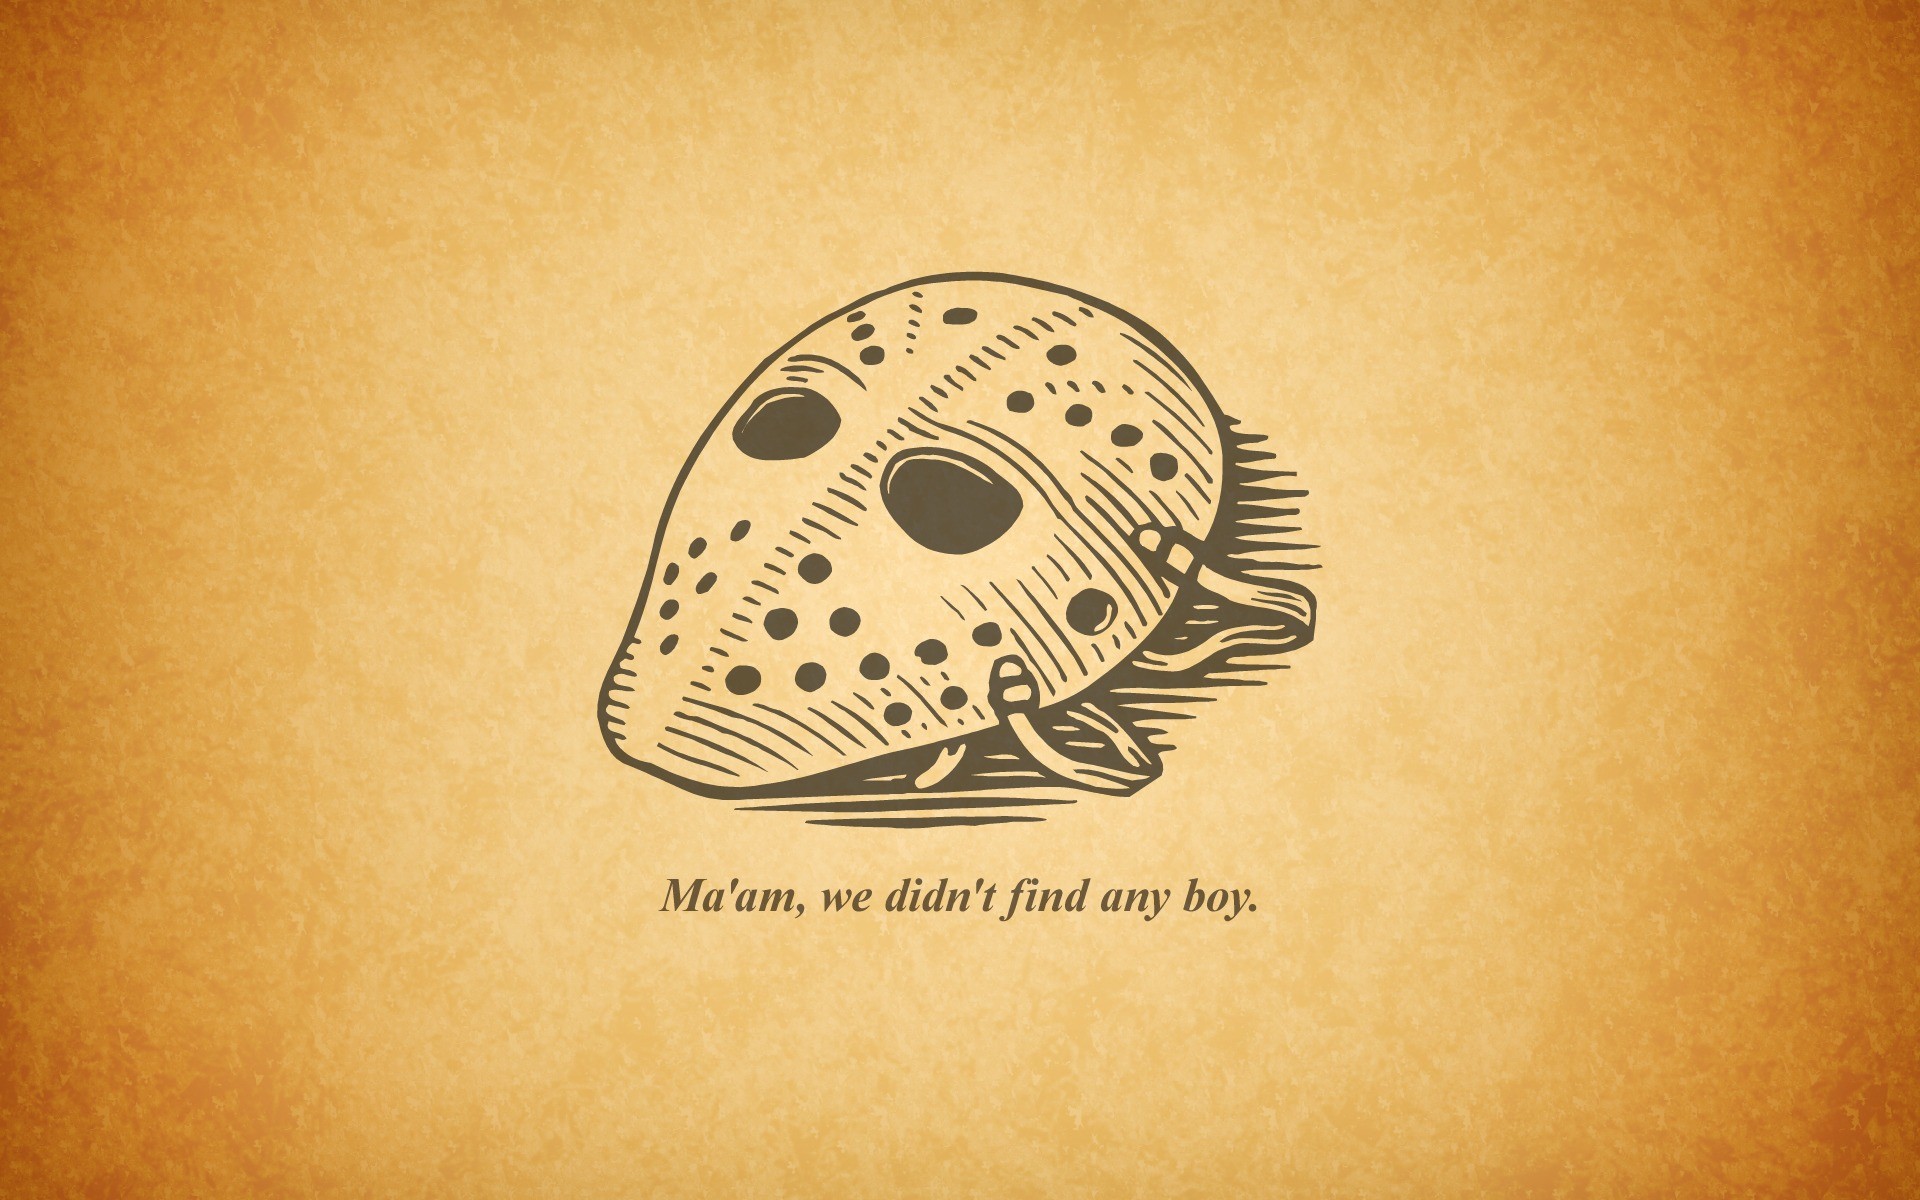 1920x1200 ... Friday the 13th quote HD Wallpaper 